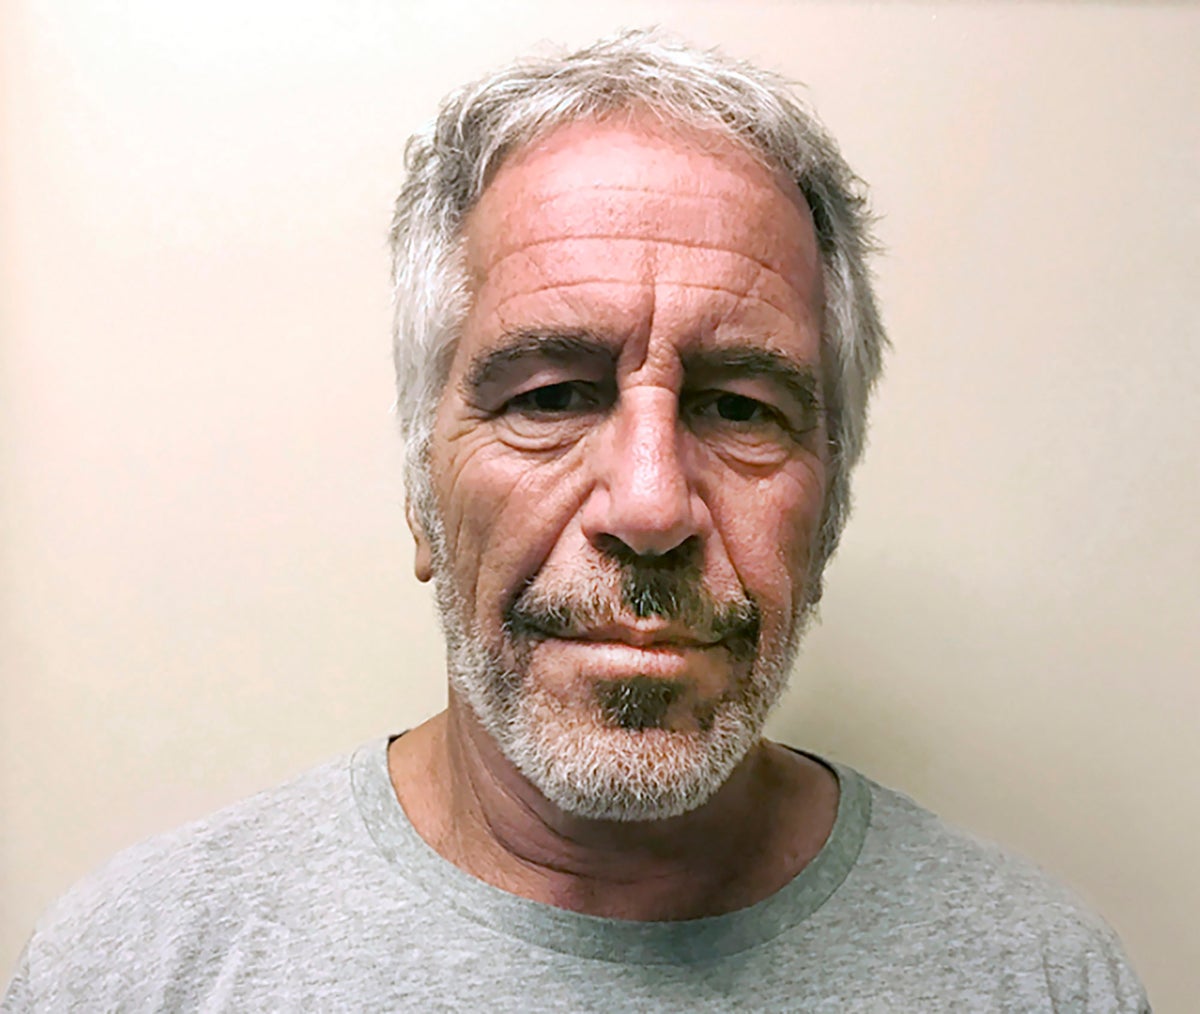 Epstein’s last days: Documents reveal what happened leading up to sex offender’s death